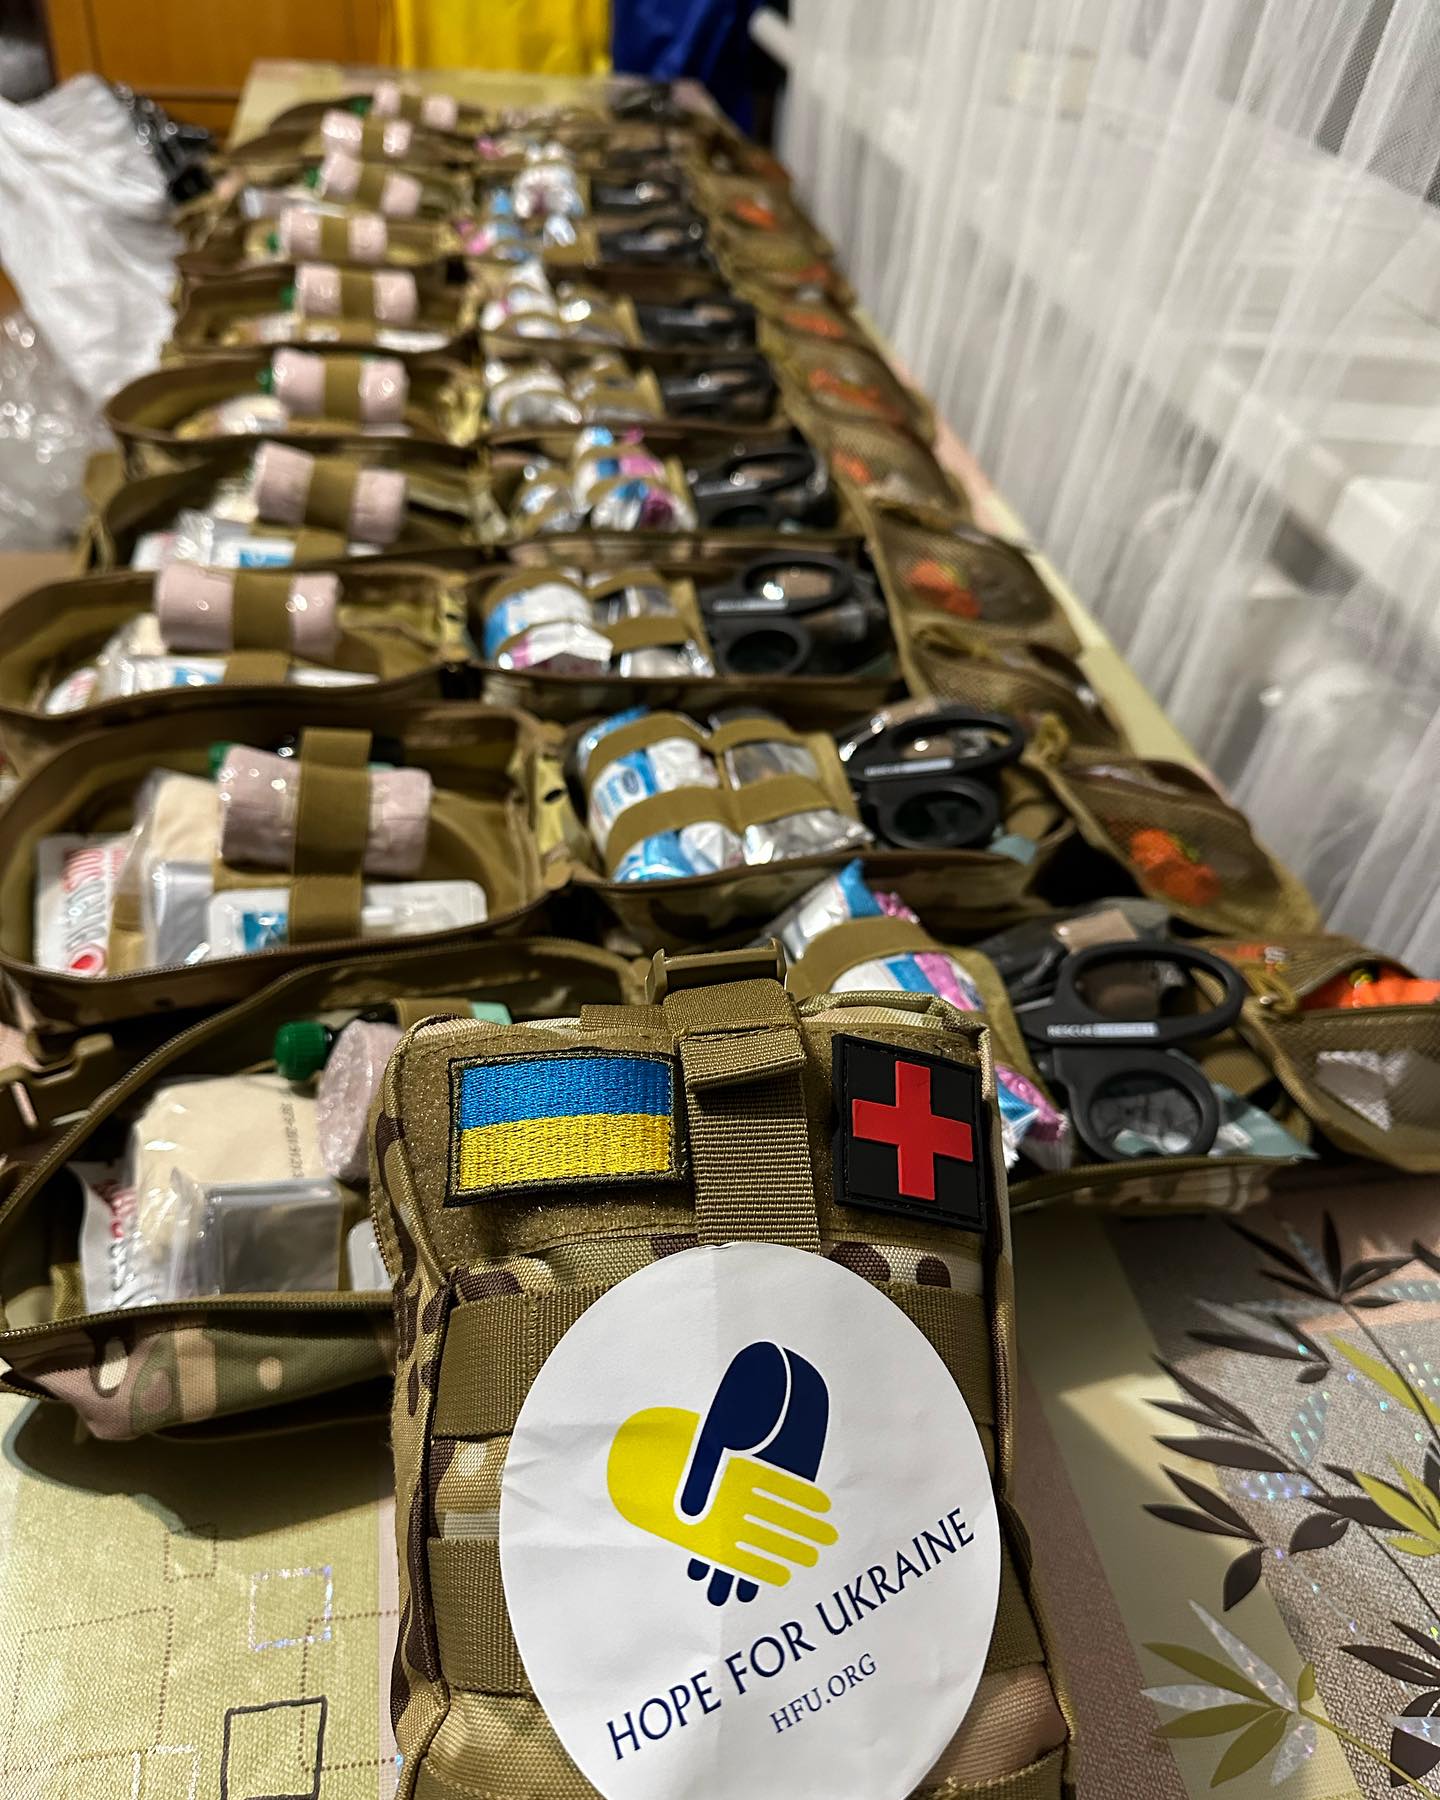 A table full of bags of medical supplies for ukraine.